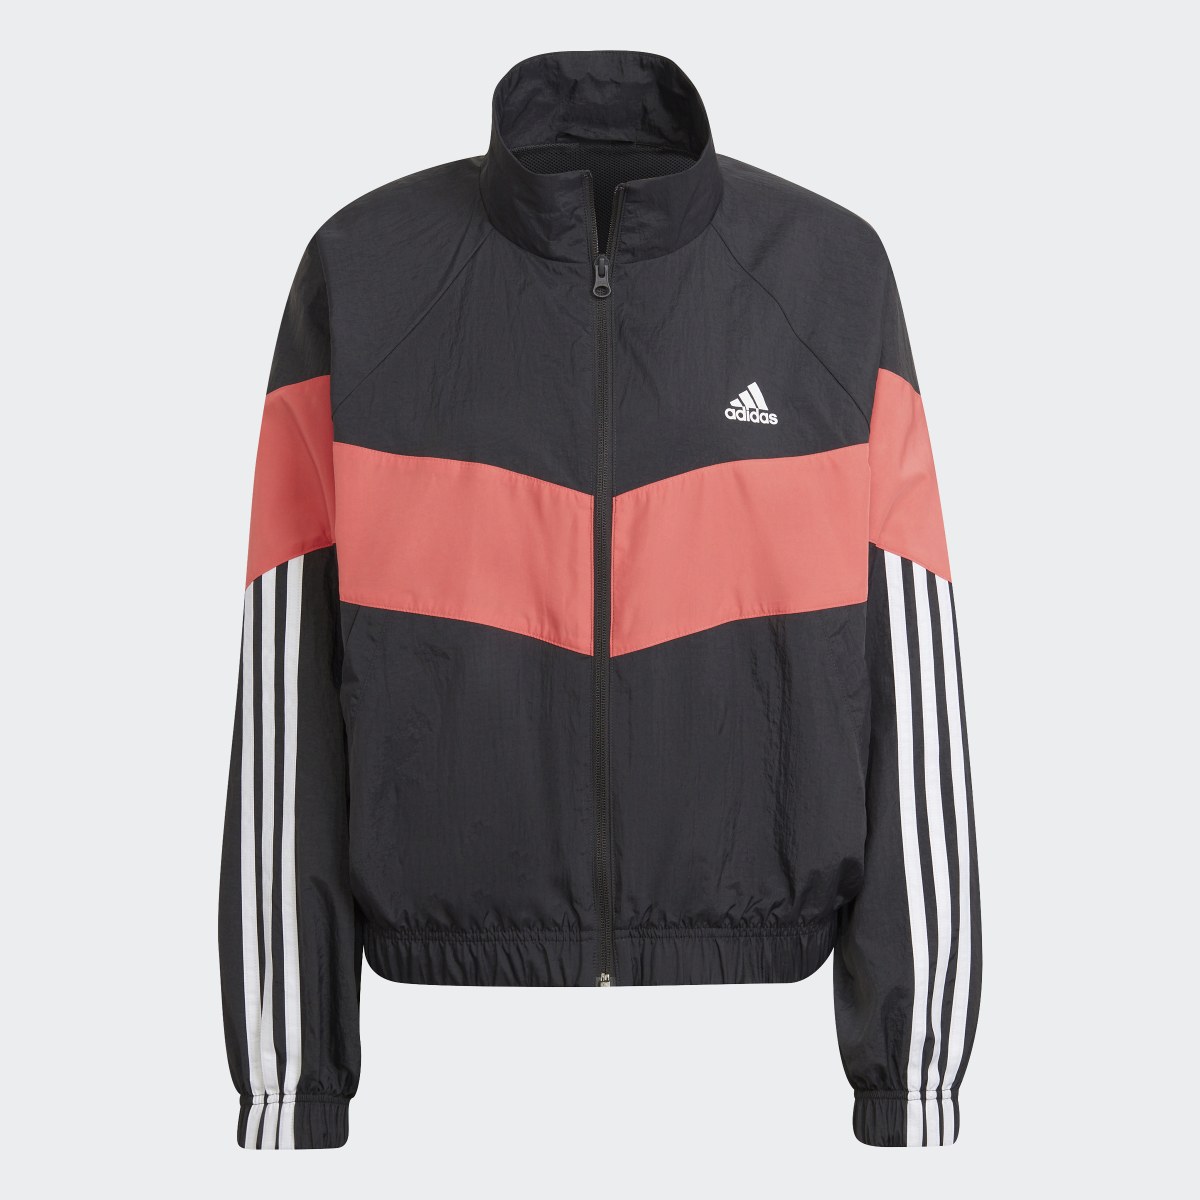 Adidas Sportswear Game Time Track Suit. 6